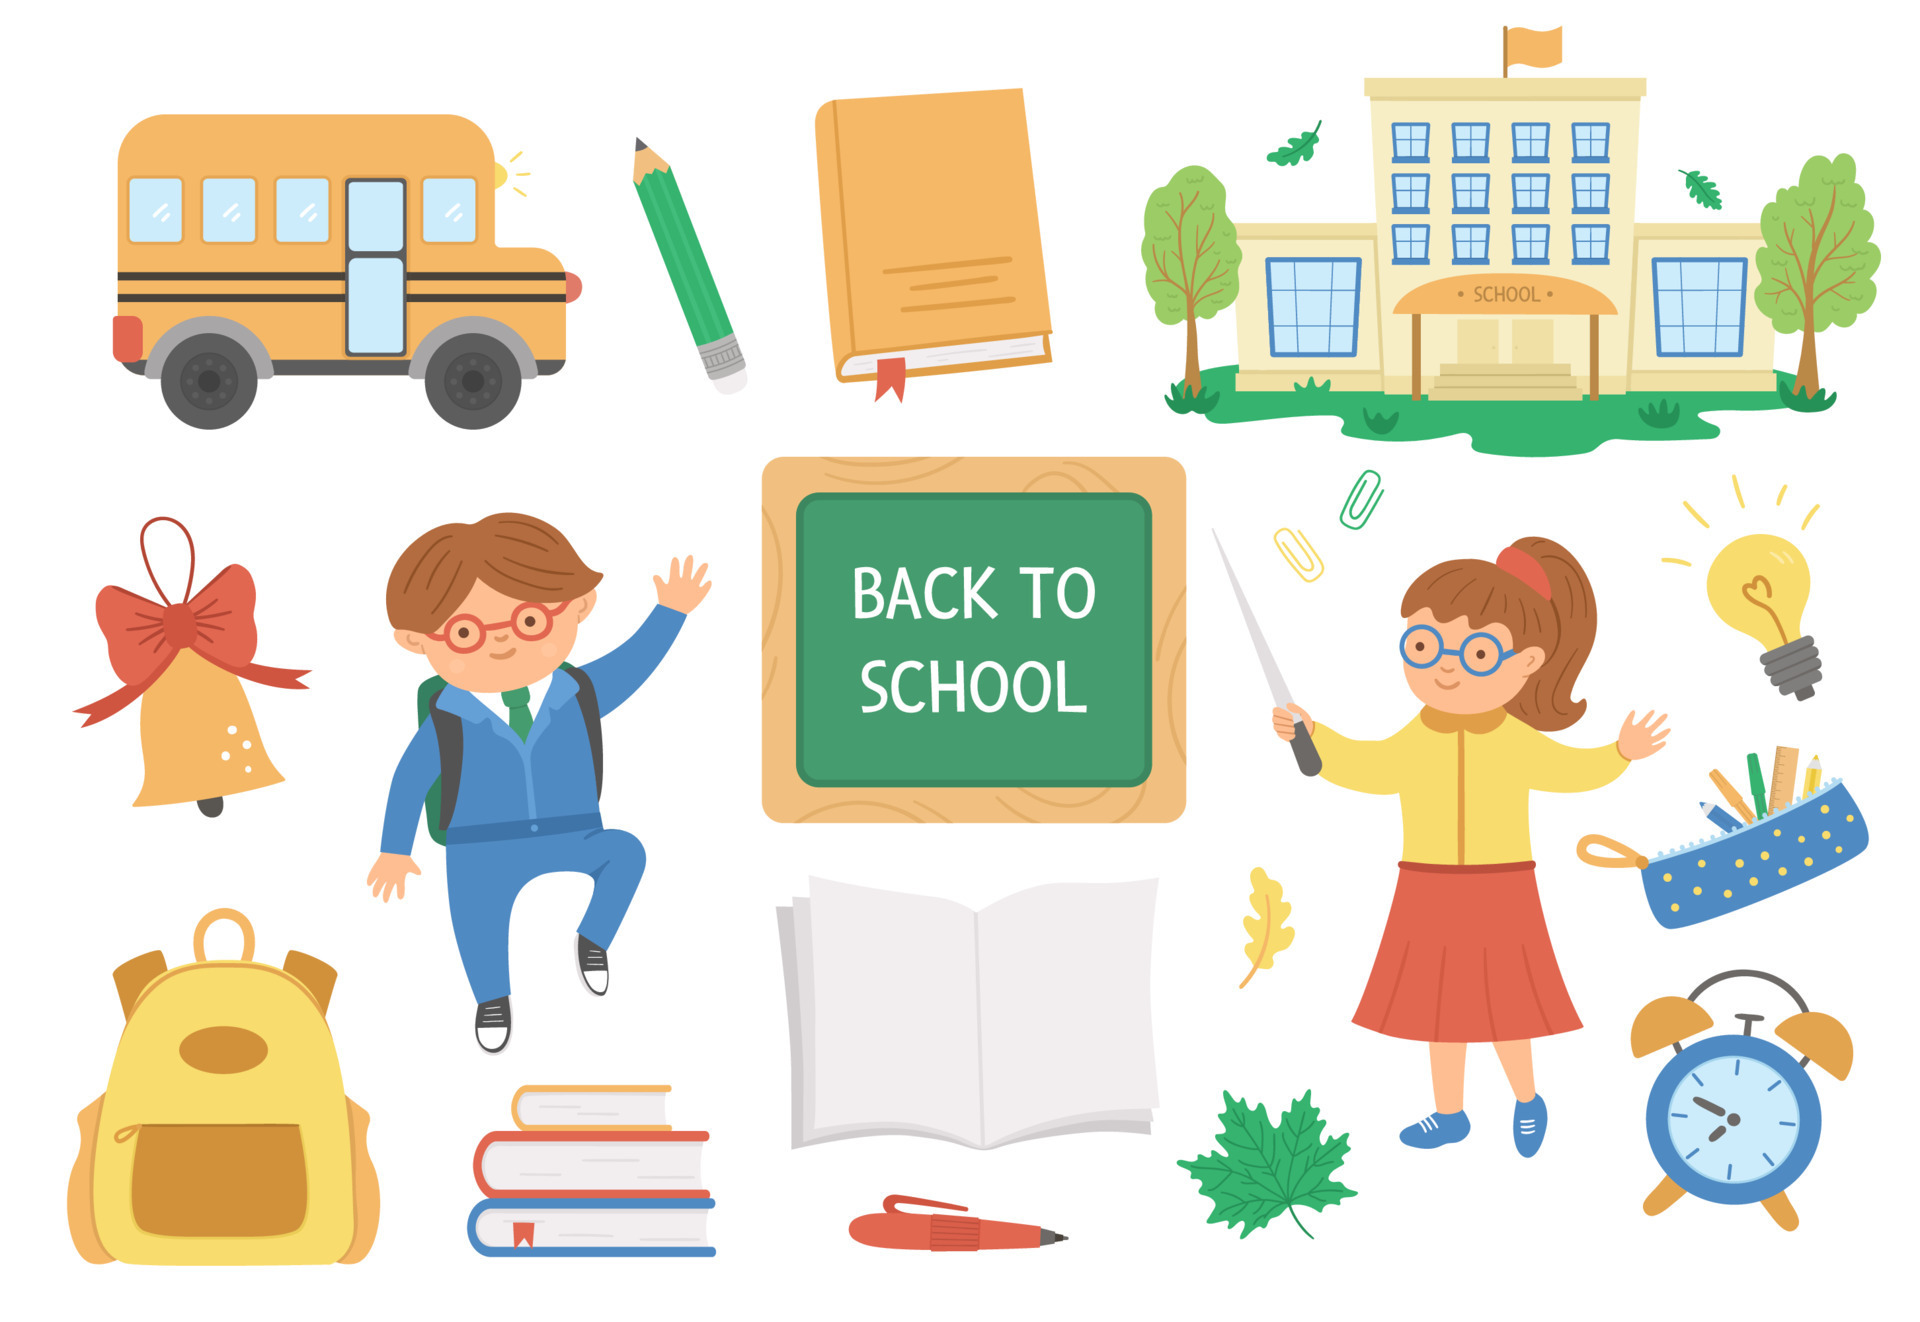 https://static.vecteezy.com/system/resources/previews/009/012/300/original/back-to-school-set-of-elements-big-educational-clipart-collection-with-teacher-and-schoolboy-cute-flat-style-classroom-objects-with-supplies-school-building-bus-books-stationery-pupil-vector.jpg